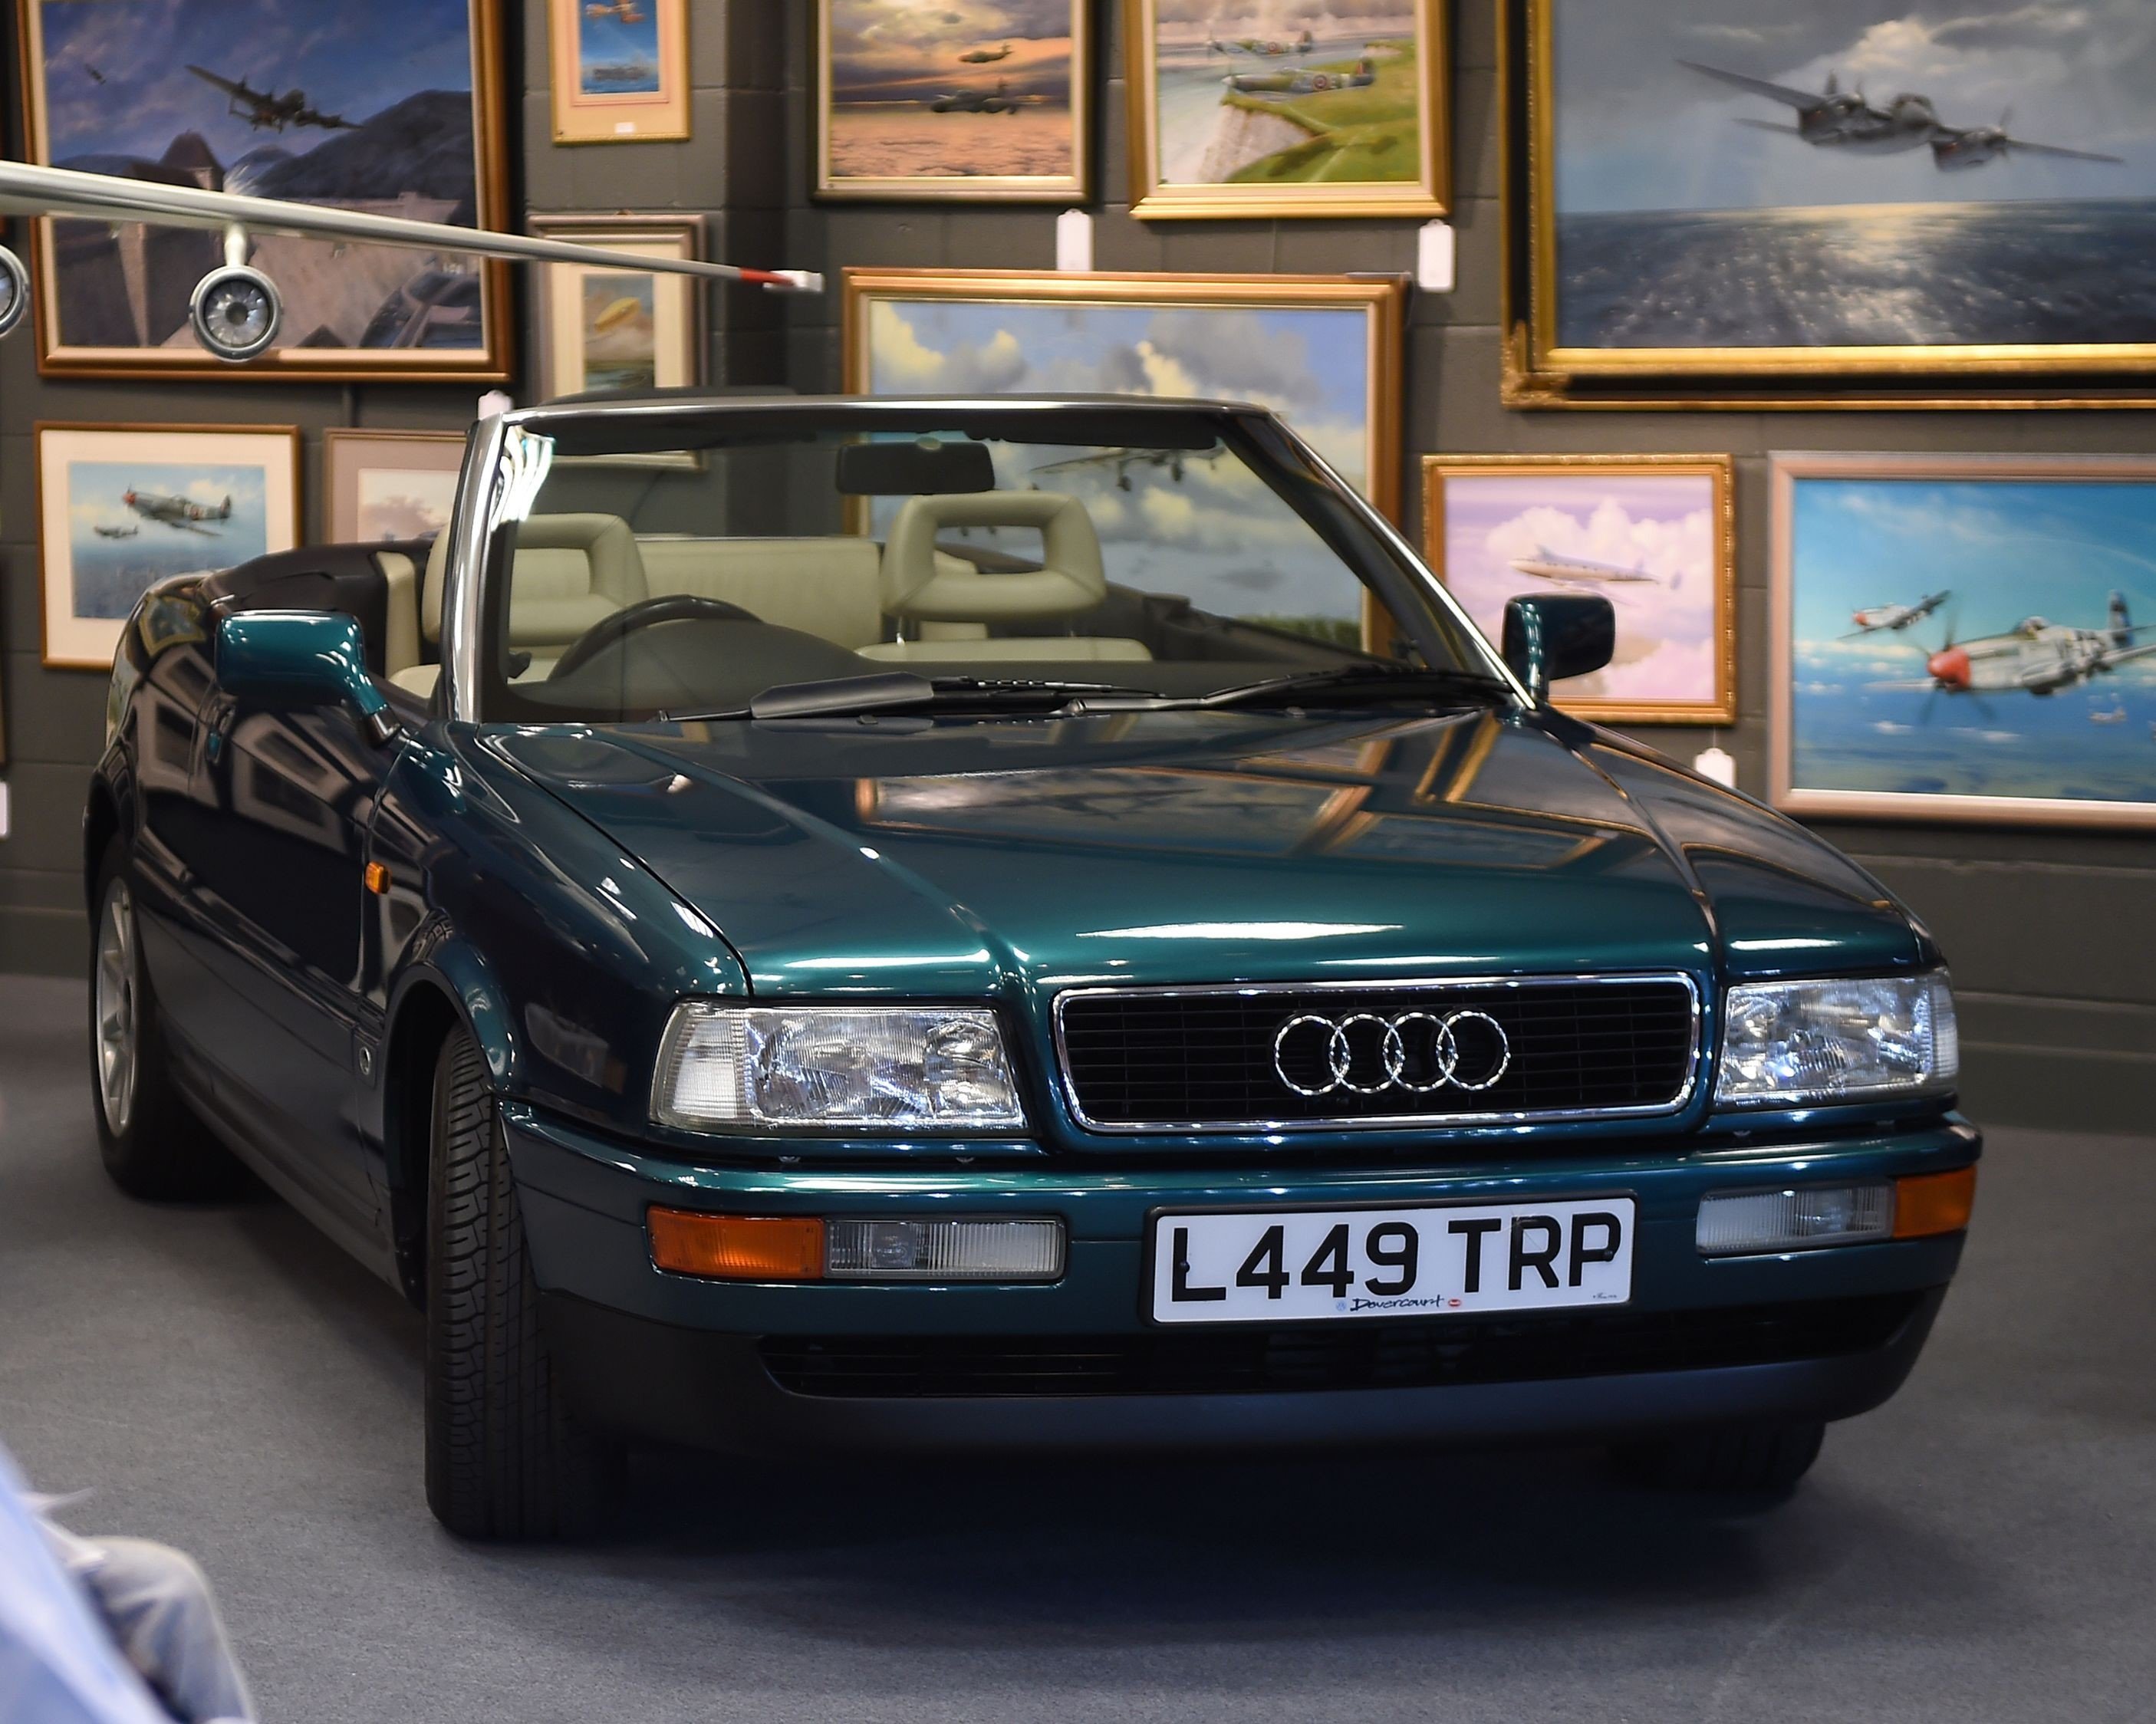 The dark green convertible Audi used by Diana, Princess of Wales